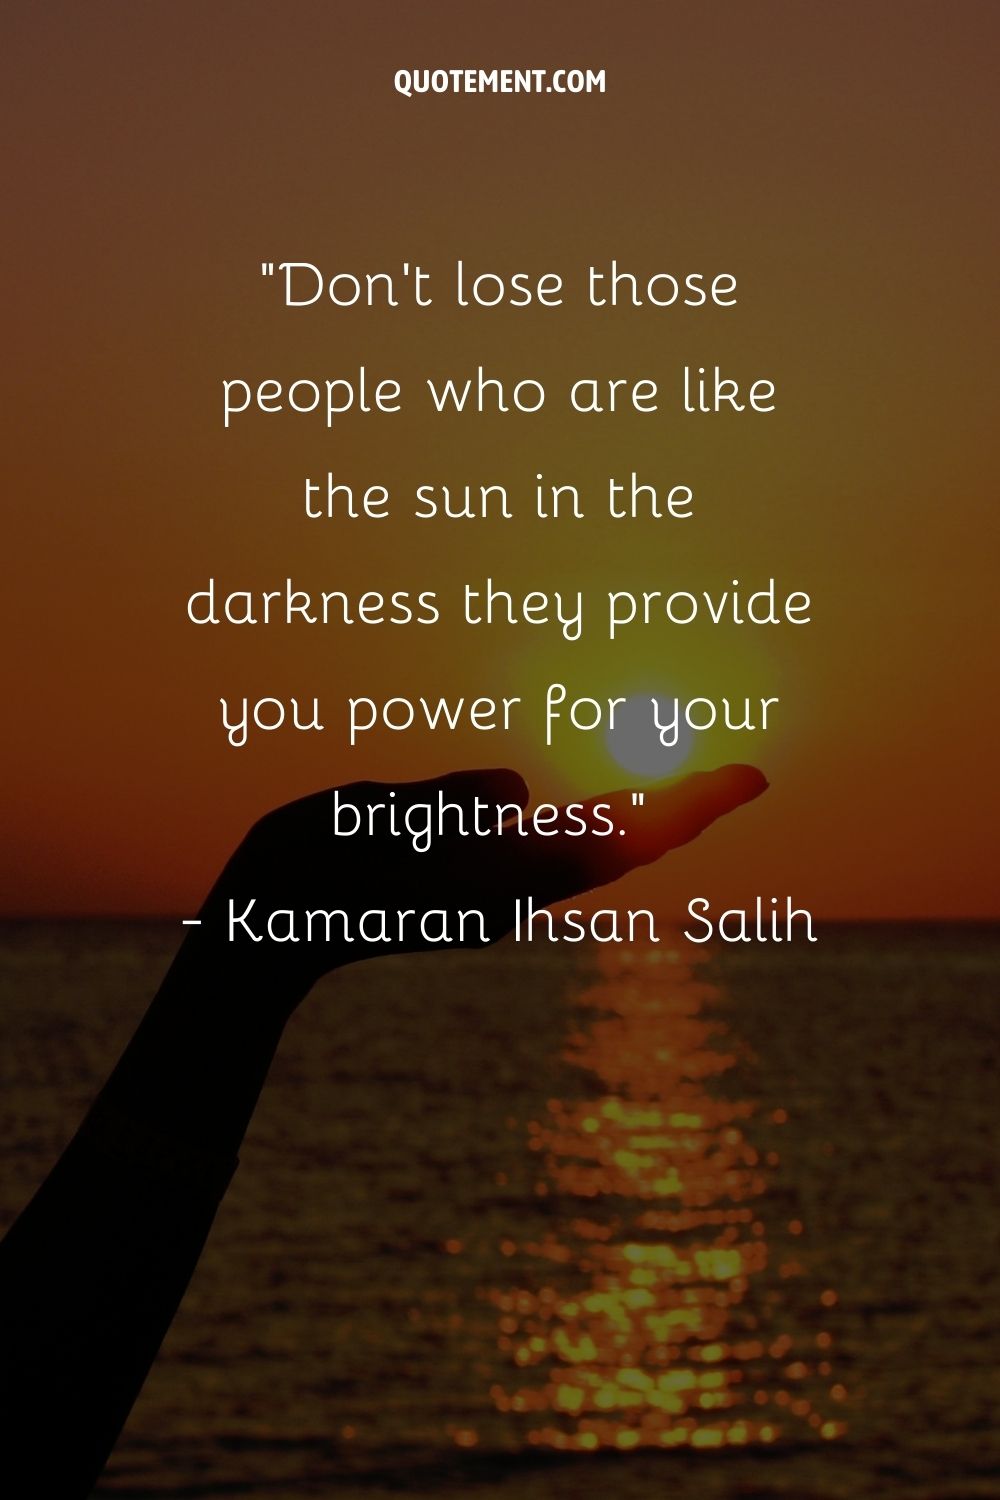 Don't lose those people who are like the sun in the darkness they provide